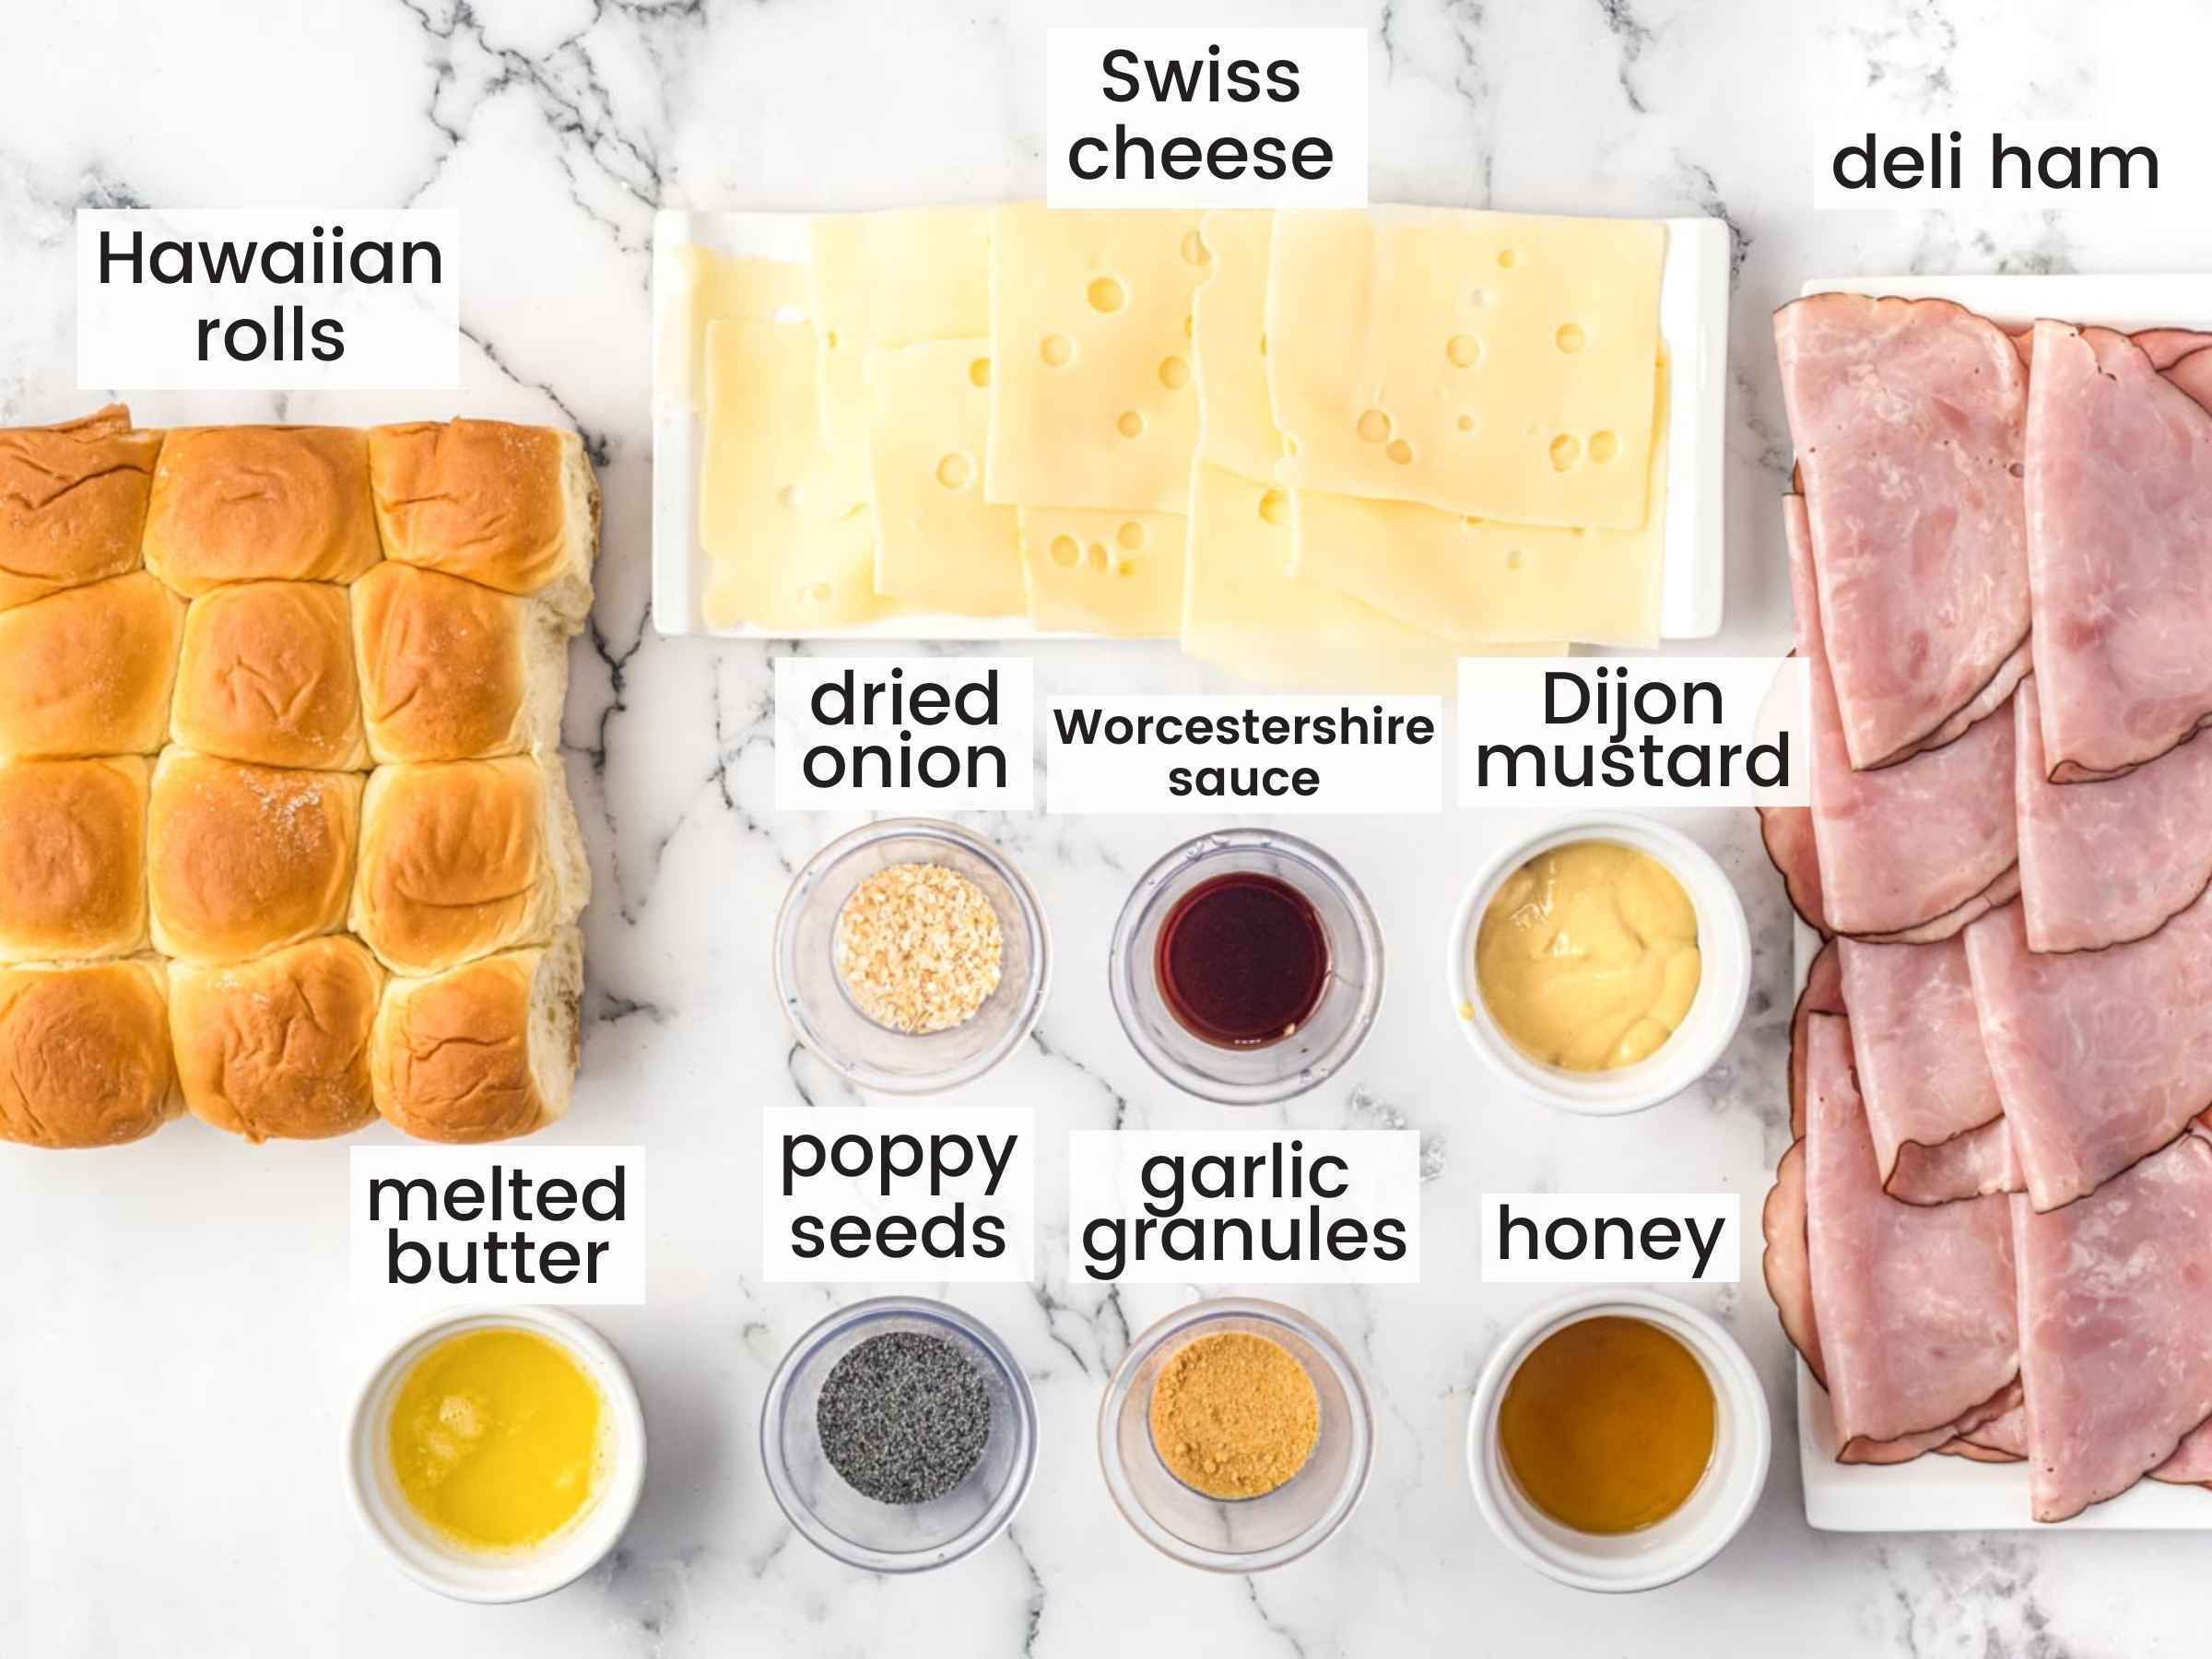 ingredients needed to make ham and cheese sliders